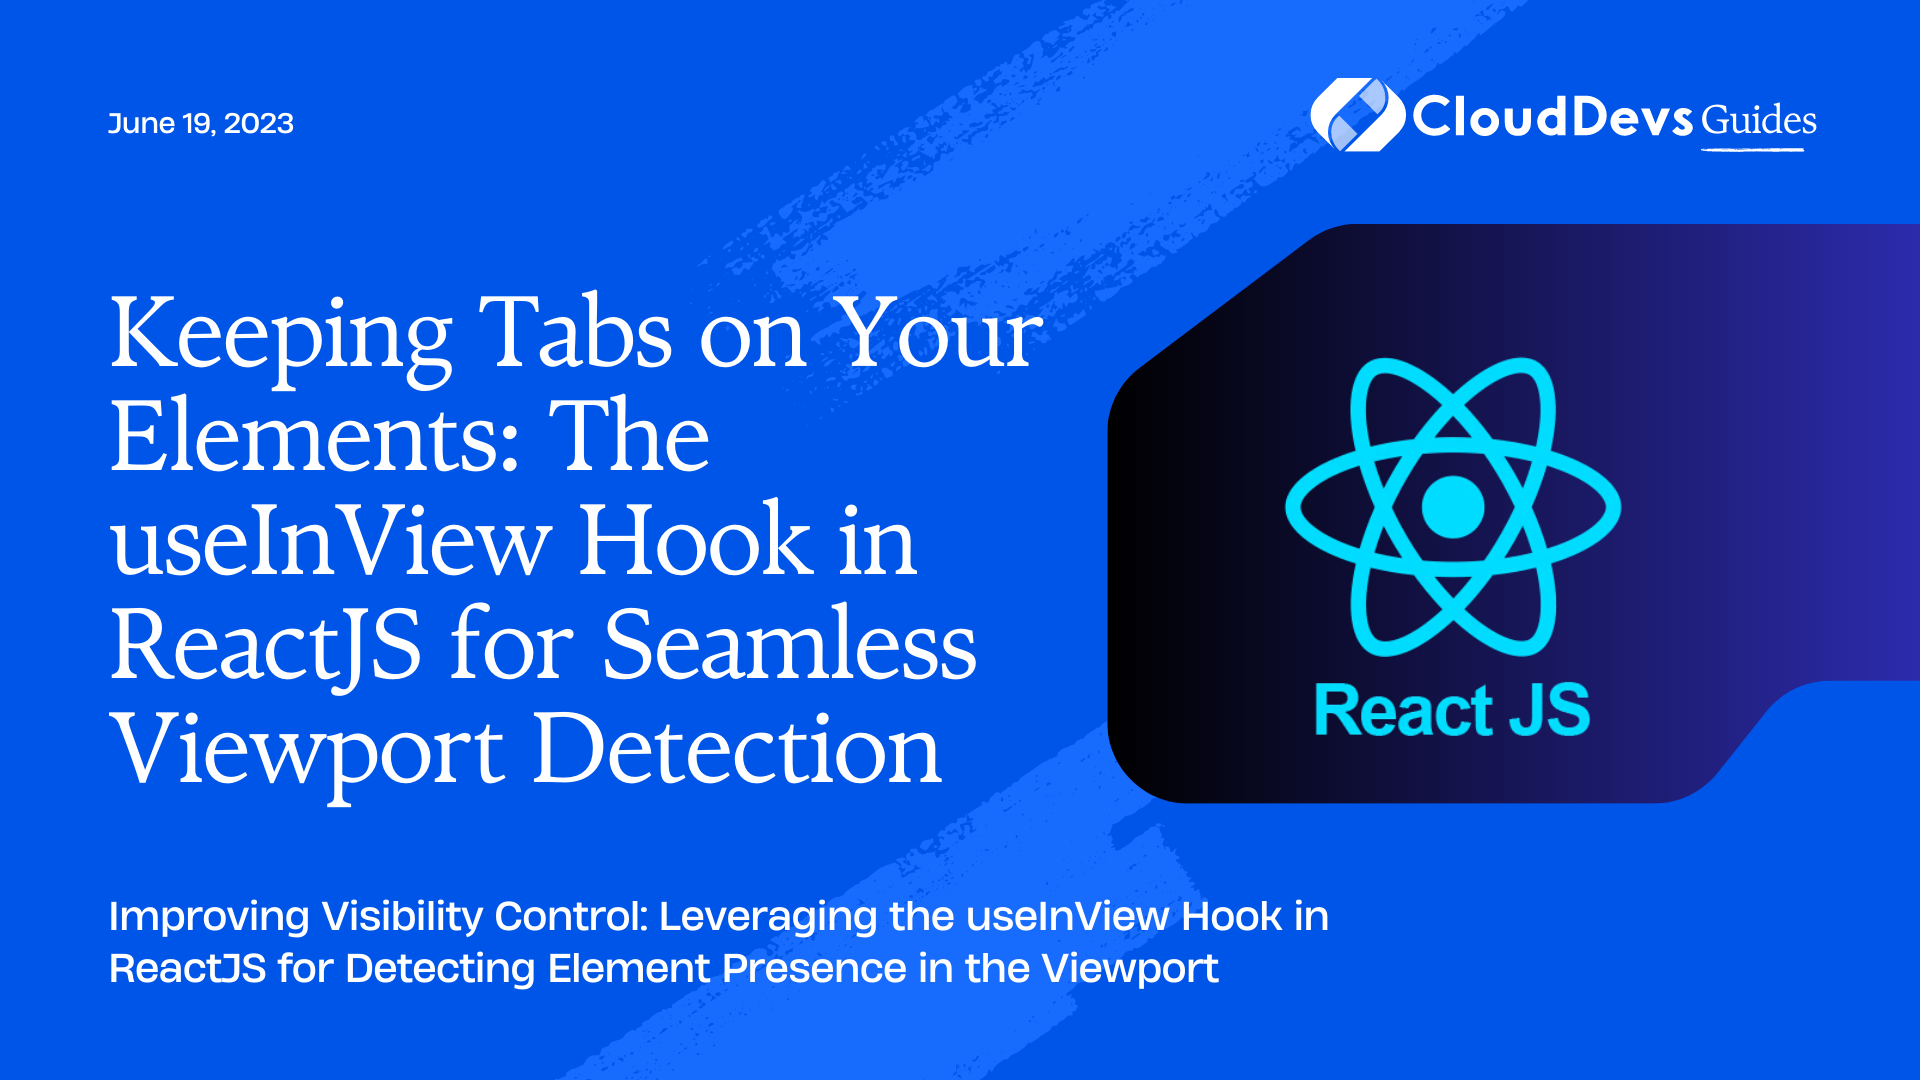 Keeping Tabs on Your Elements: The useInView Hook in ReactJS for Seamless Viewport Detection